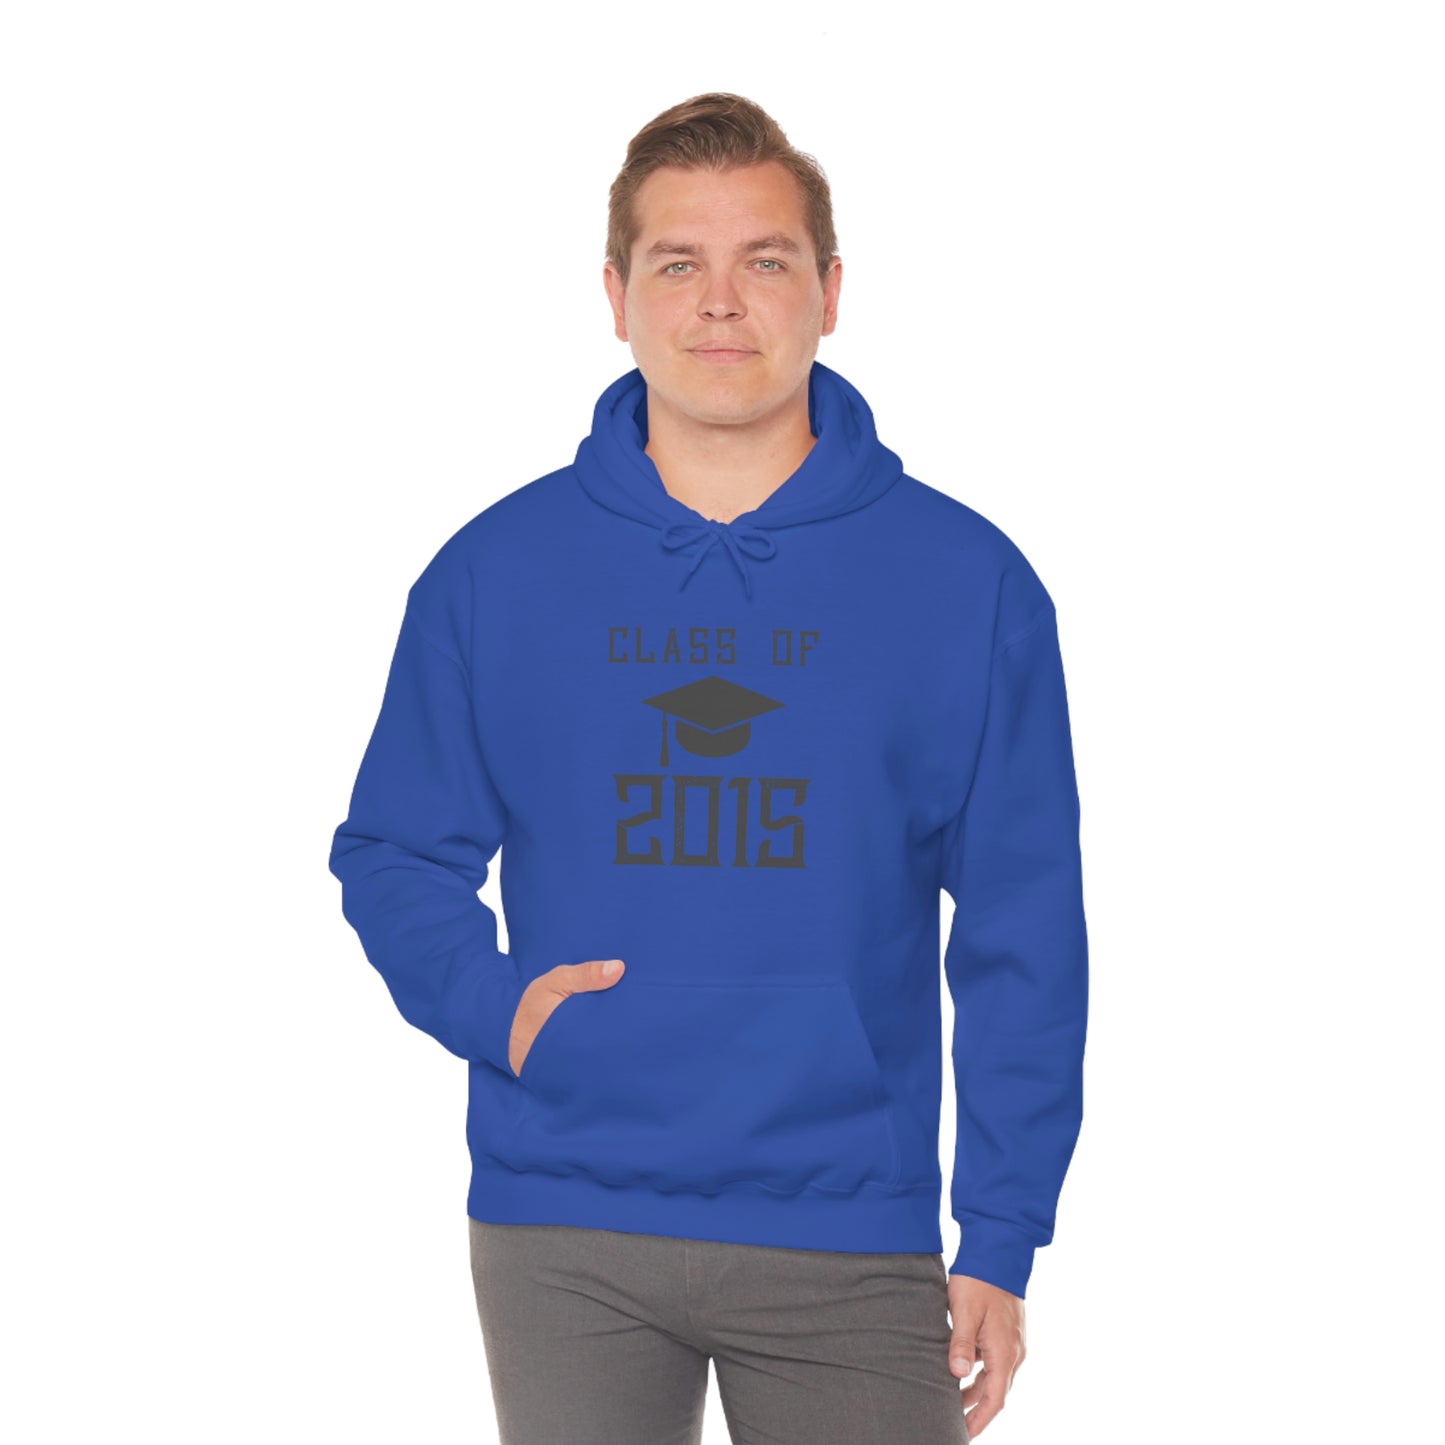 "Class Of 2015" hoodie - Weave Got Gifts - Unique Gifts You Won’t Find Anywhere Else!